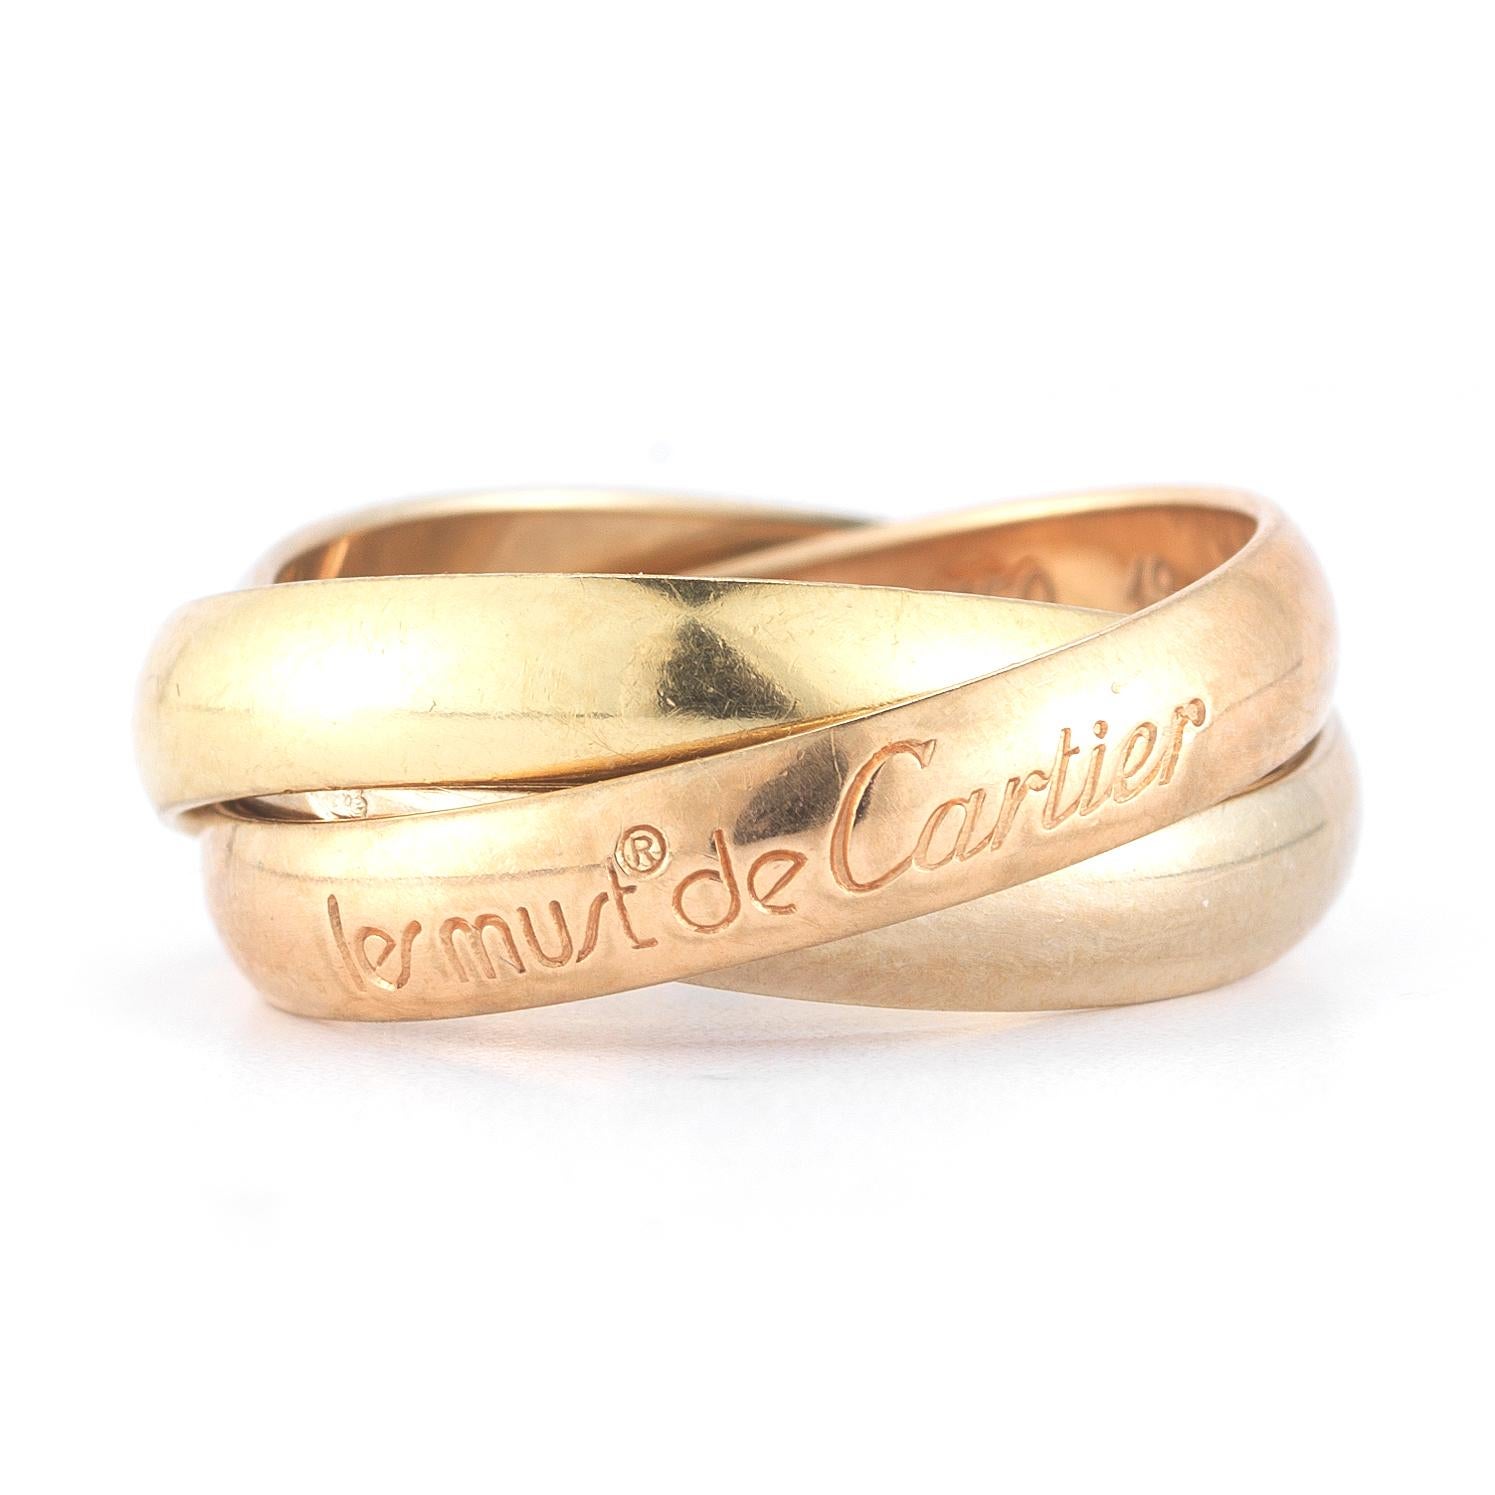 Tri-Color Gold Les Must de Cartier Trinity Band Ring with 18 karat yellow gold, rose gold and white gold interlaced bands each measuring approximately 3.5mm is signed Cartier A4492V. Finger size 4.75. Pink, yellow and white gold symbolize love,